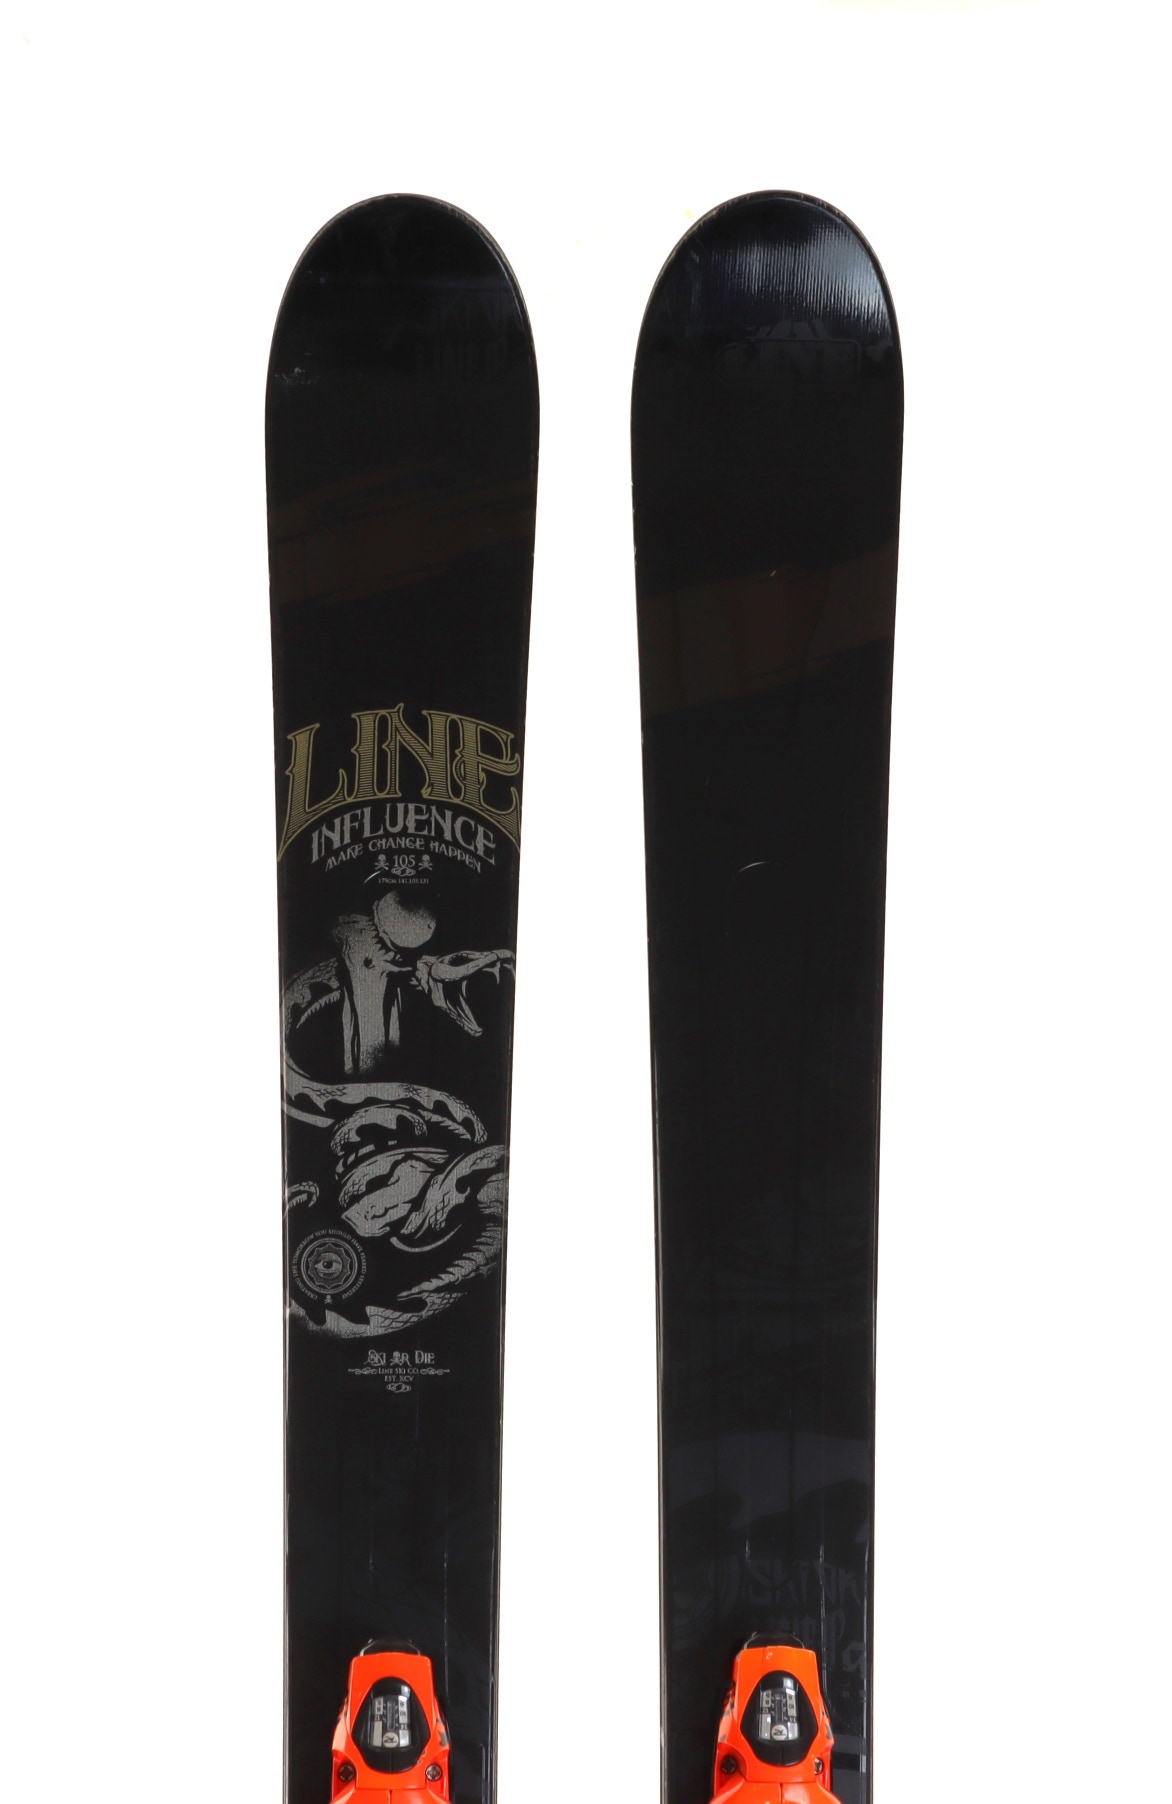 Used 2012 Line Influence 105 Ski with Rossignol FKS Bindings Size 179 (Option 240094)